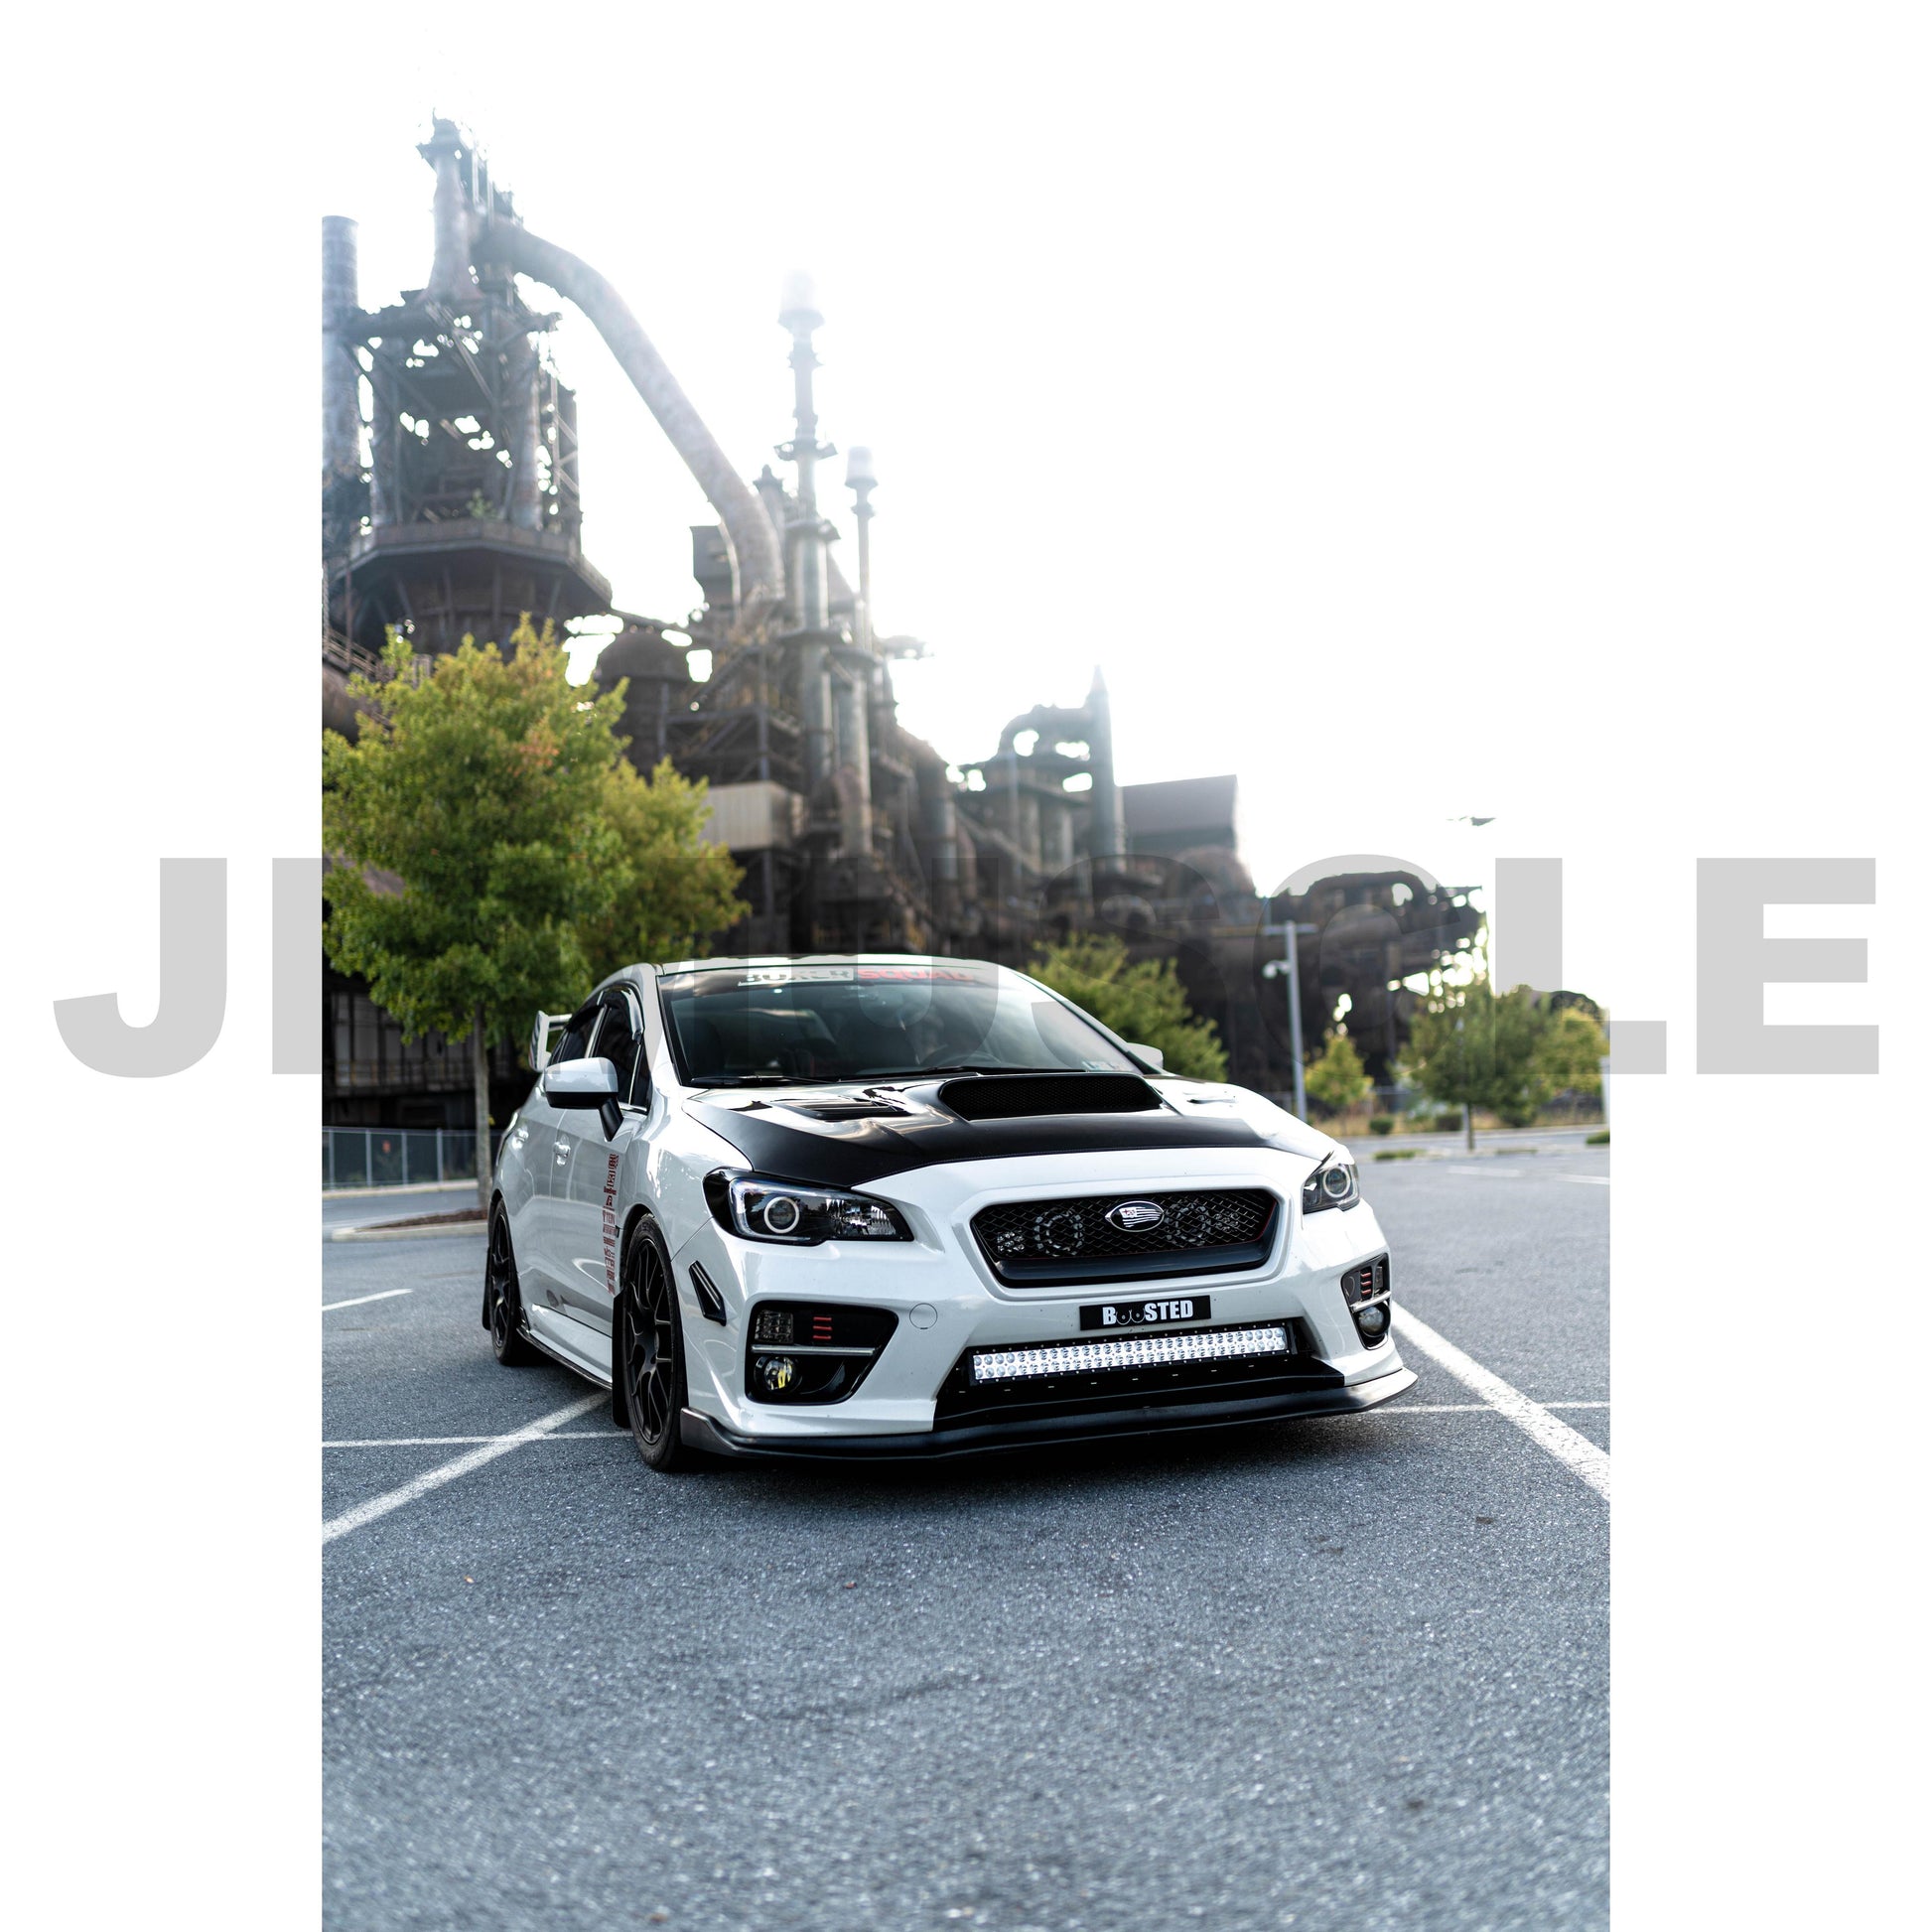 JDMuscle Tanso Carbon Fiber/Painted Canards V1 - 2015+ WRX/STI-Canards-JDMuscle-JDMuscle